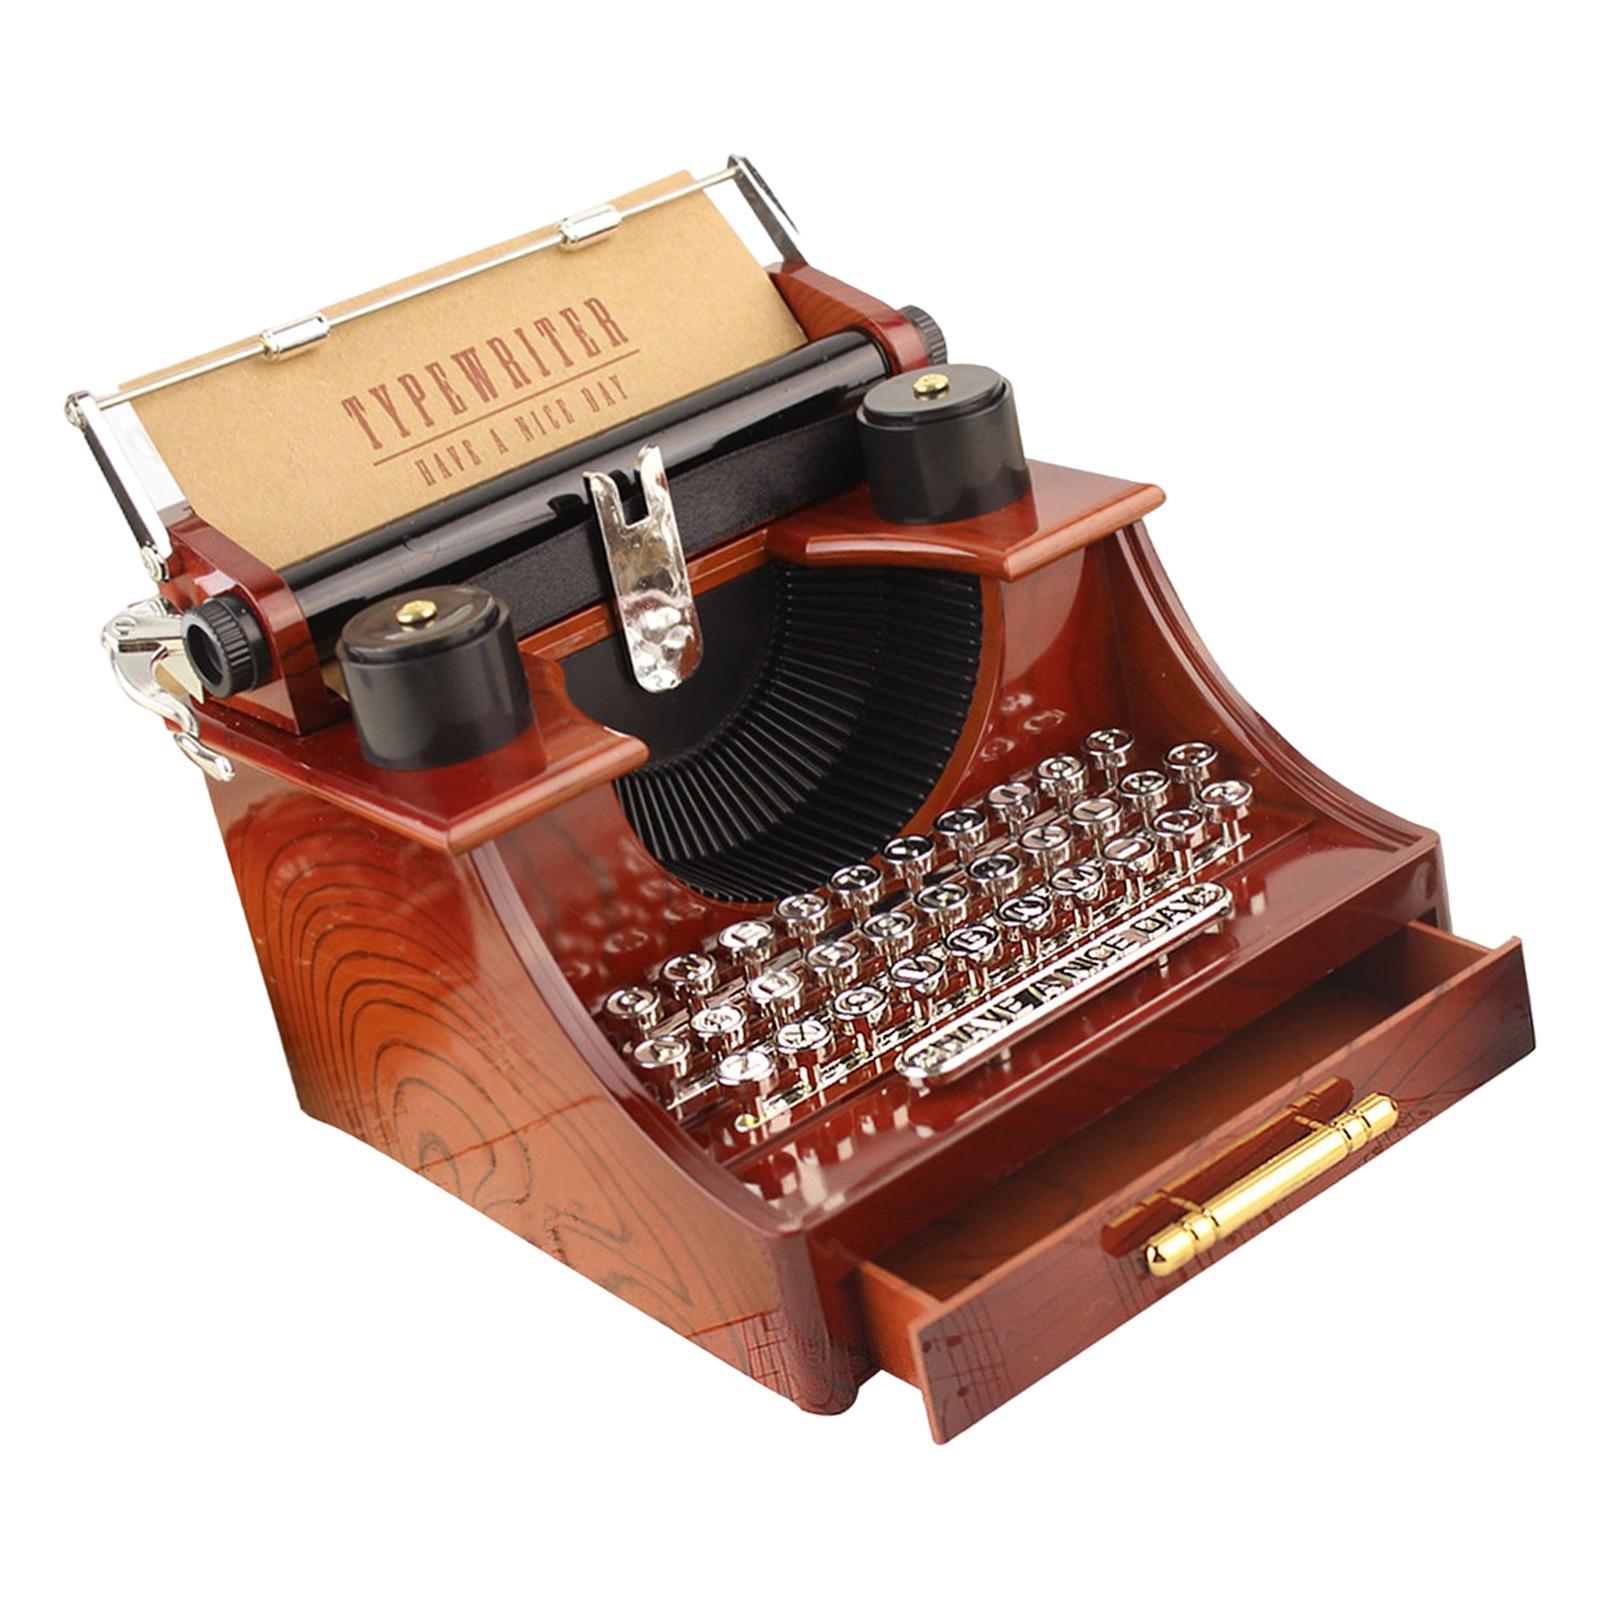 Typewriter Music Box Tabletop Ornaments Clockwork Music Box for Event Party